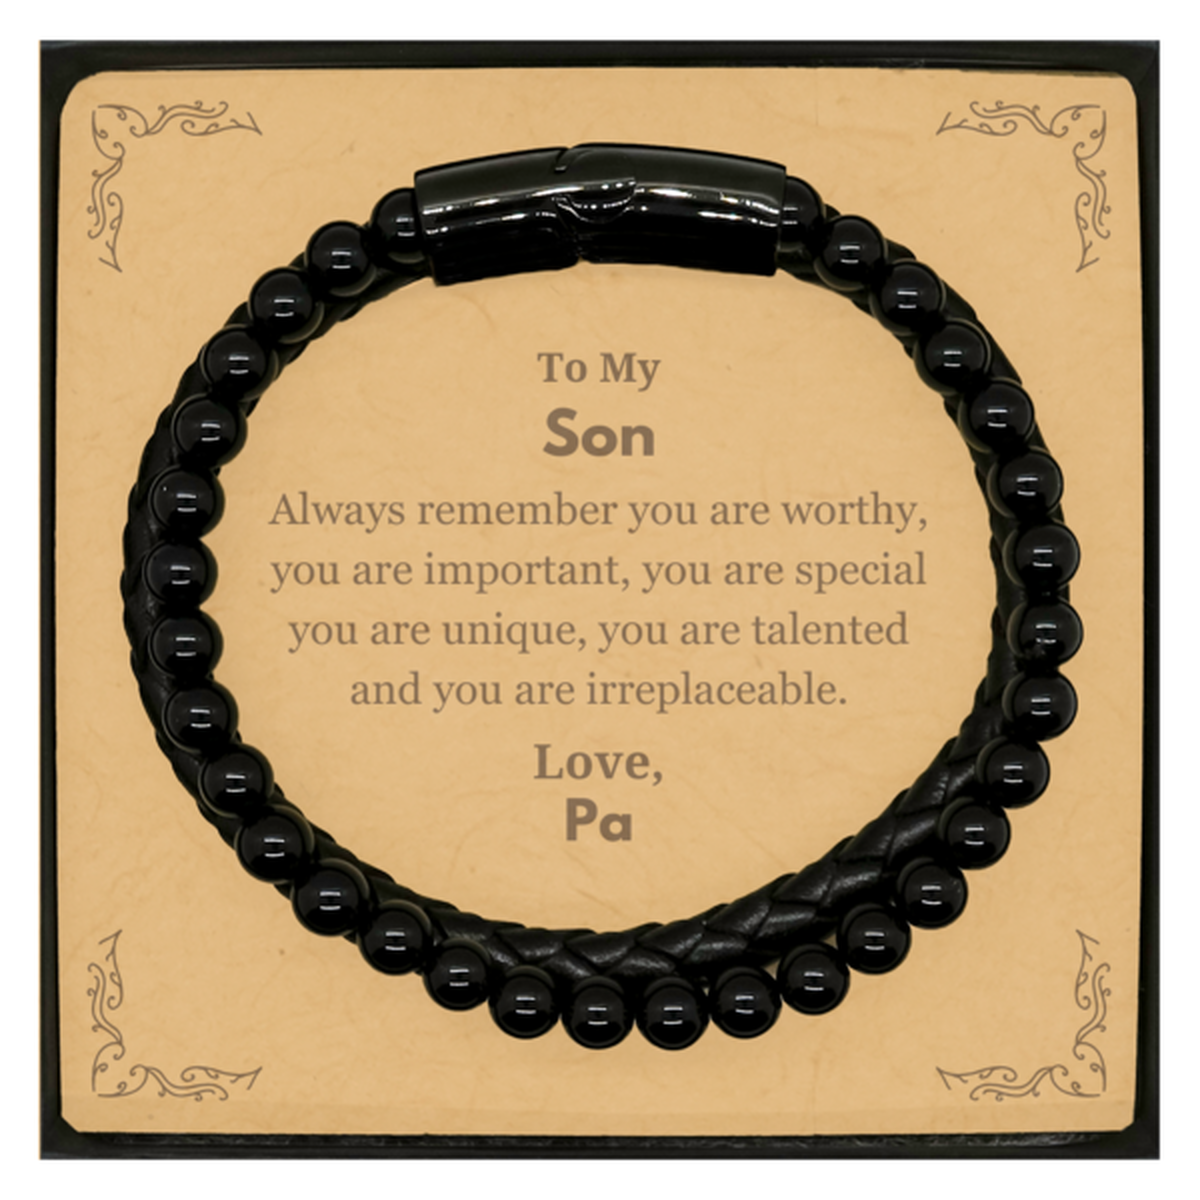 Son Birthday Gifts from Pa, Inspirational Stone Leather Bracelets for Son Christmas Graduation Gifts for Son Always remember you are worthy, you are important. Love, Pa